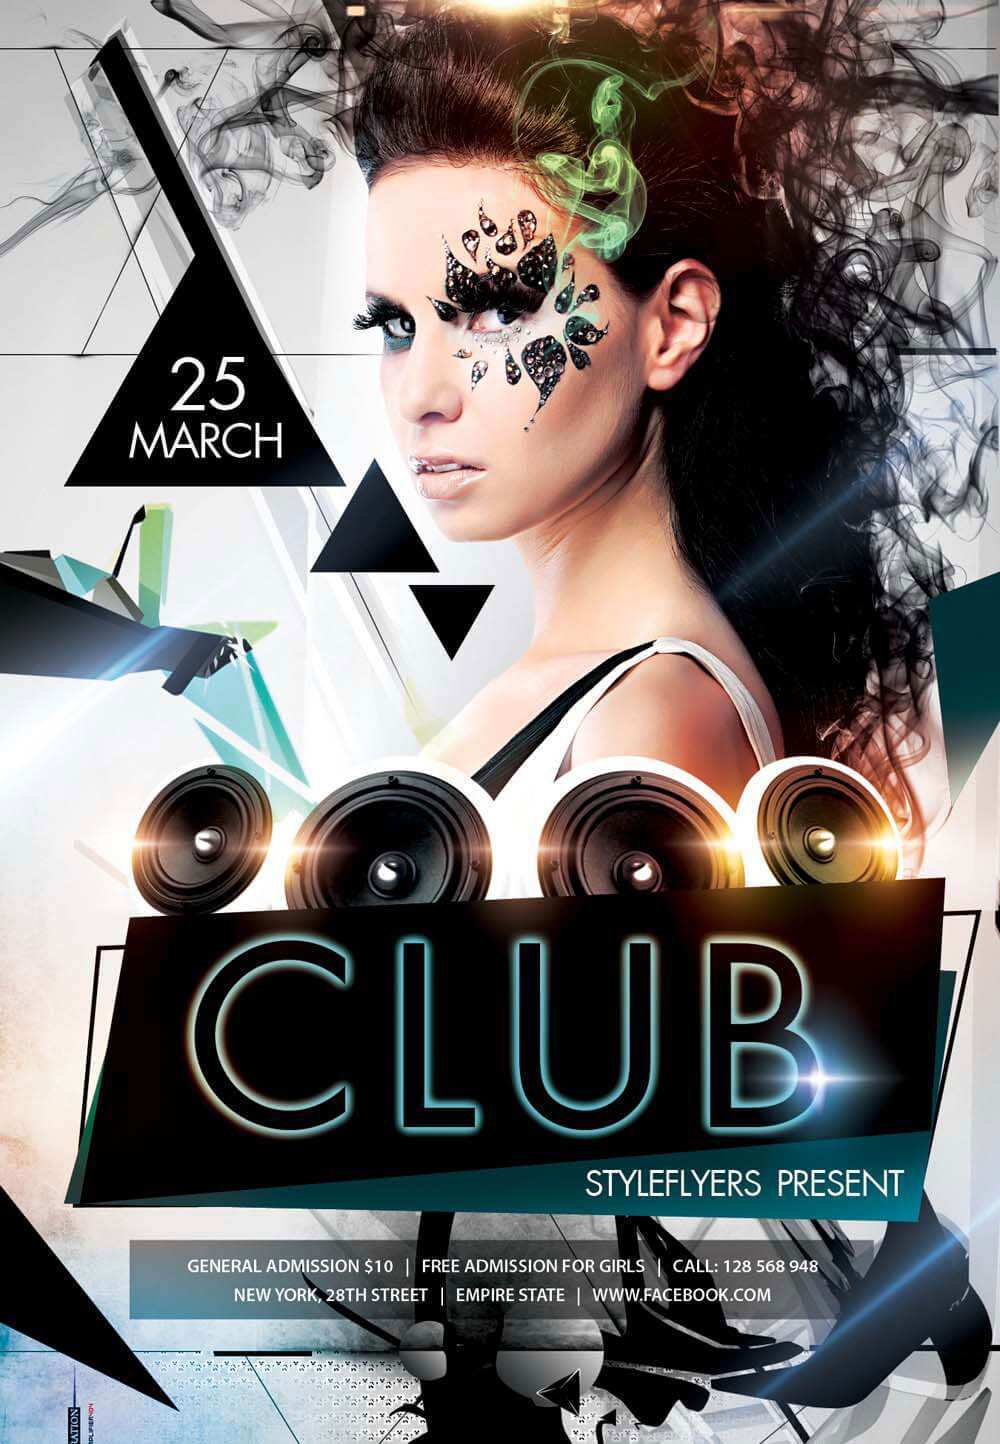 45 Customize Club Flyer Templates Free Download Now for Club Flyer Templates Free Download